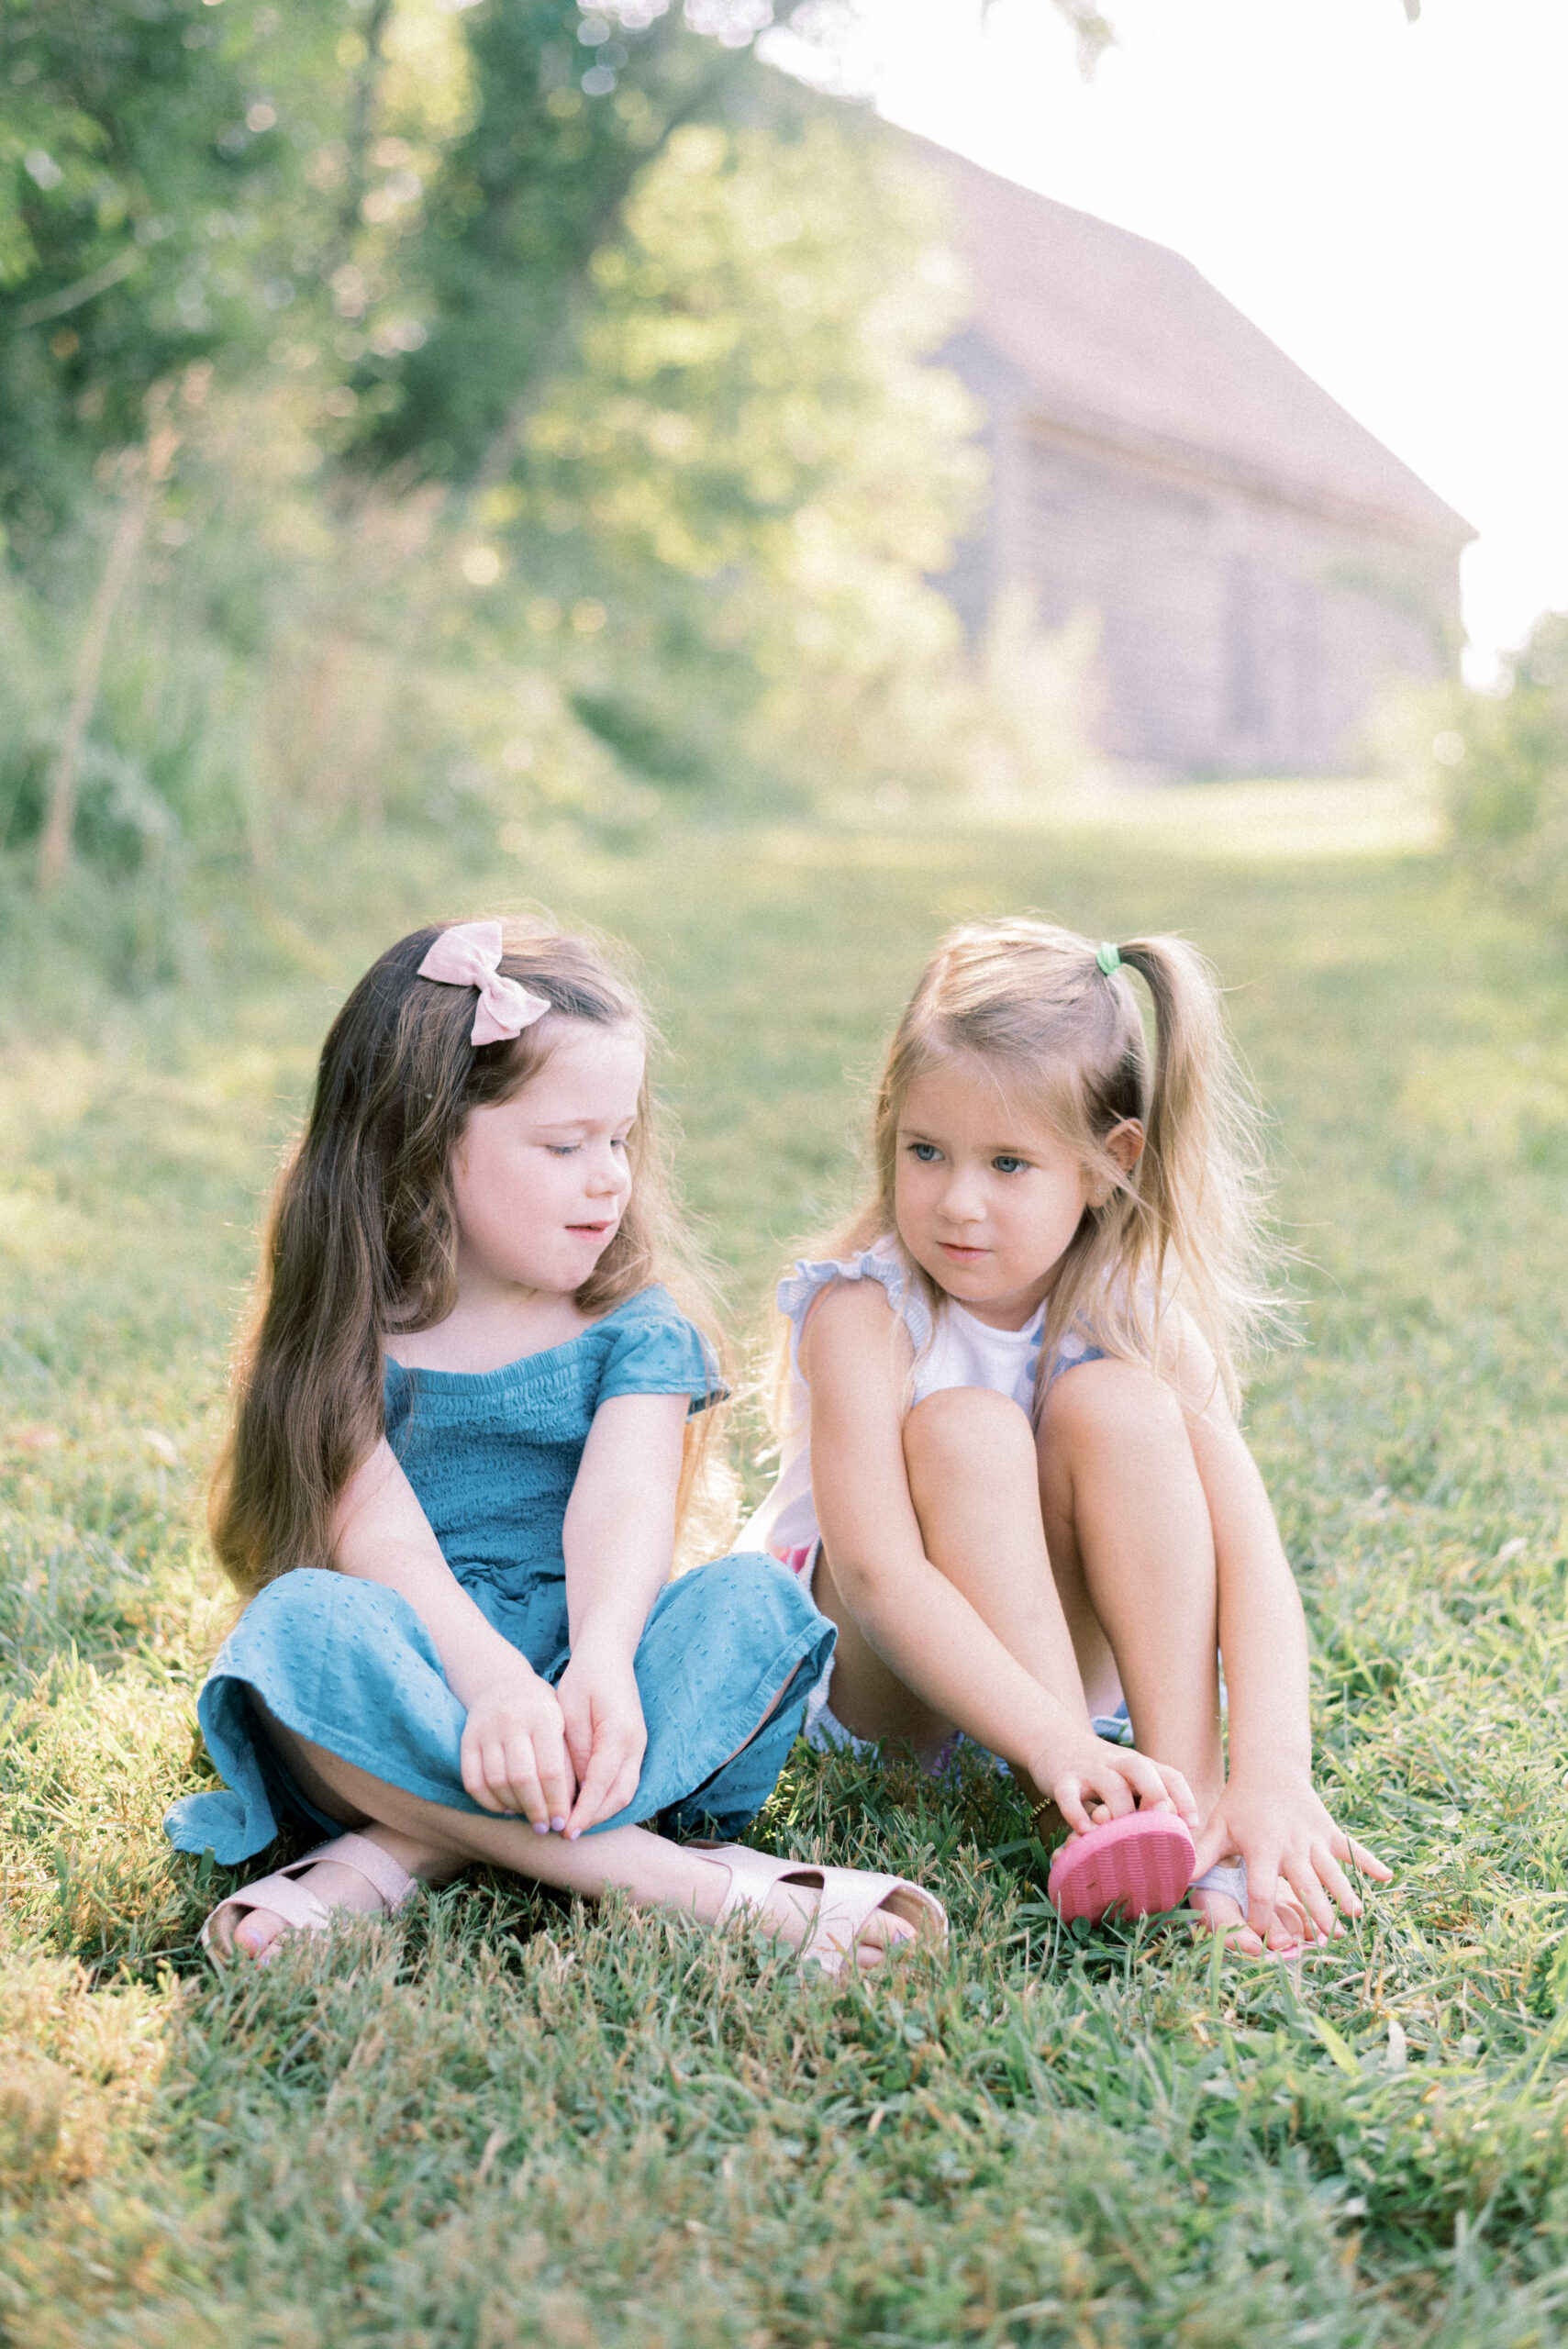 Maryland photographer captures cousins sitting in grass together